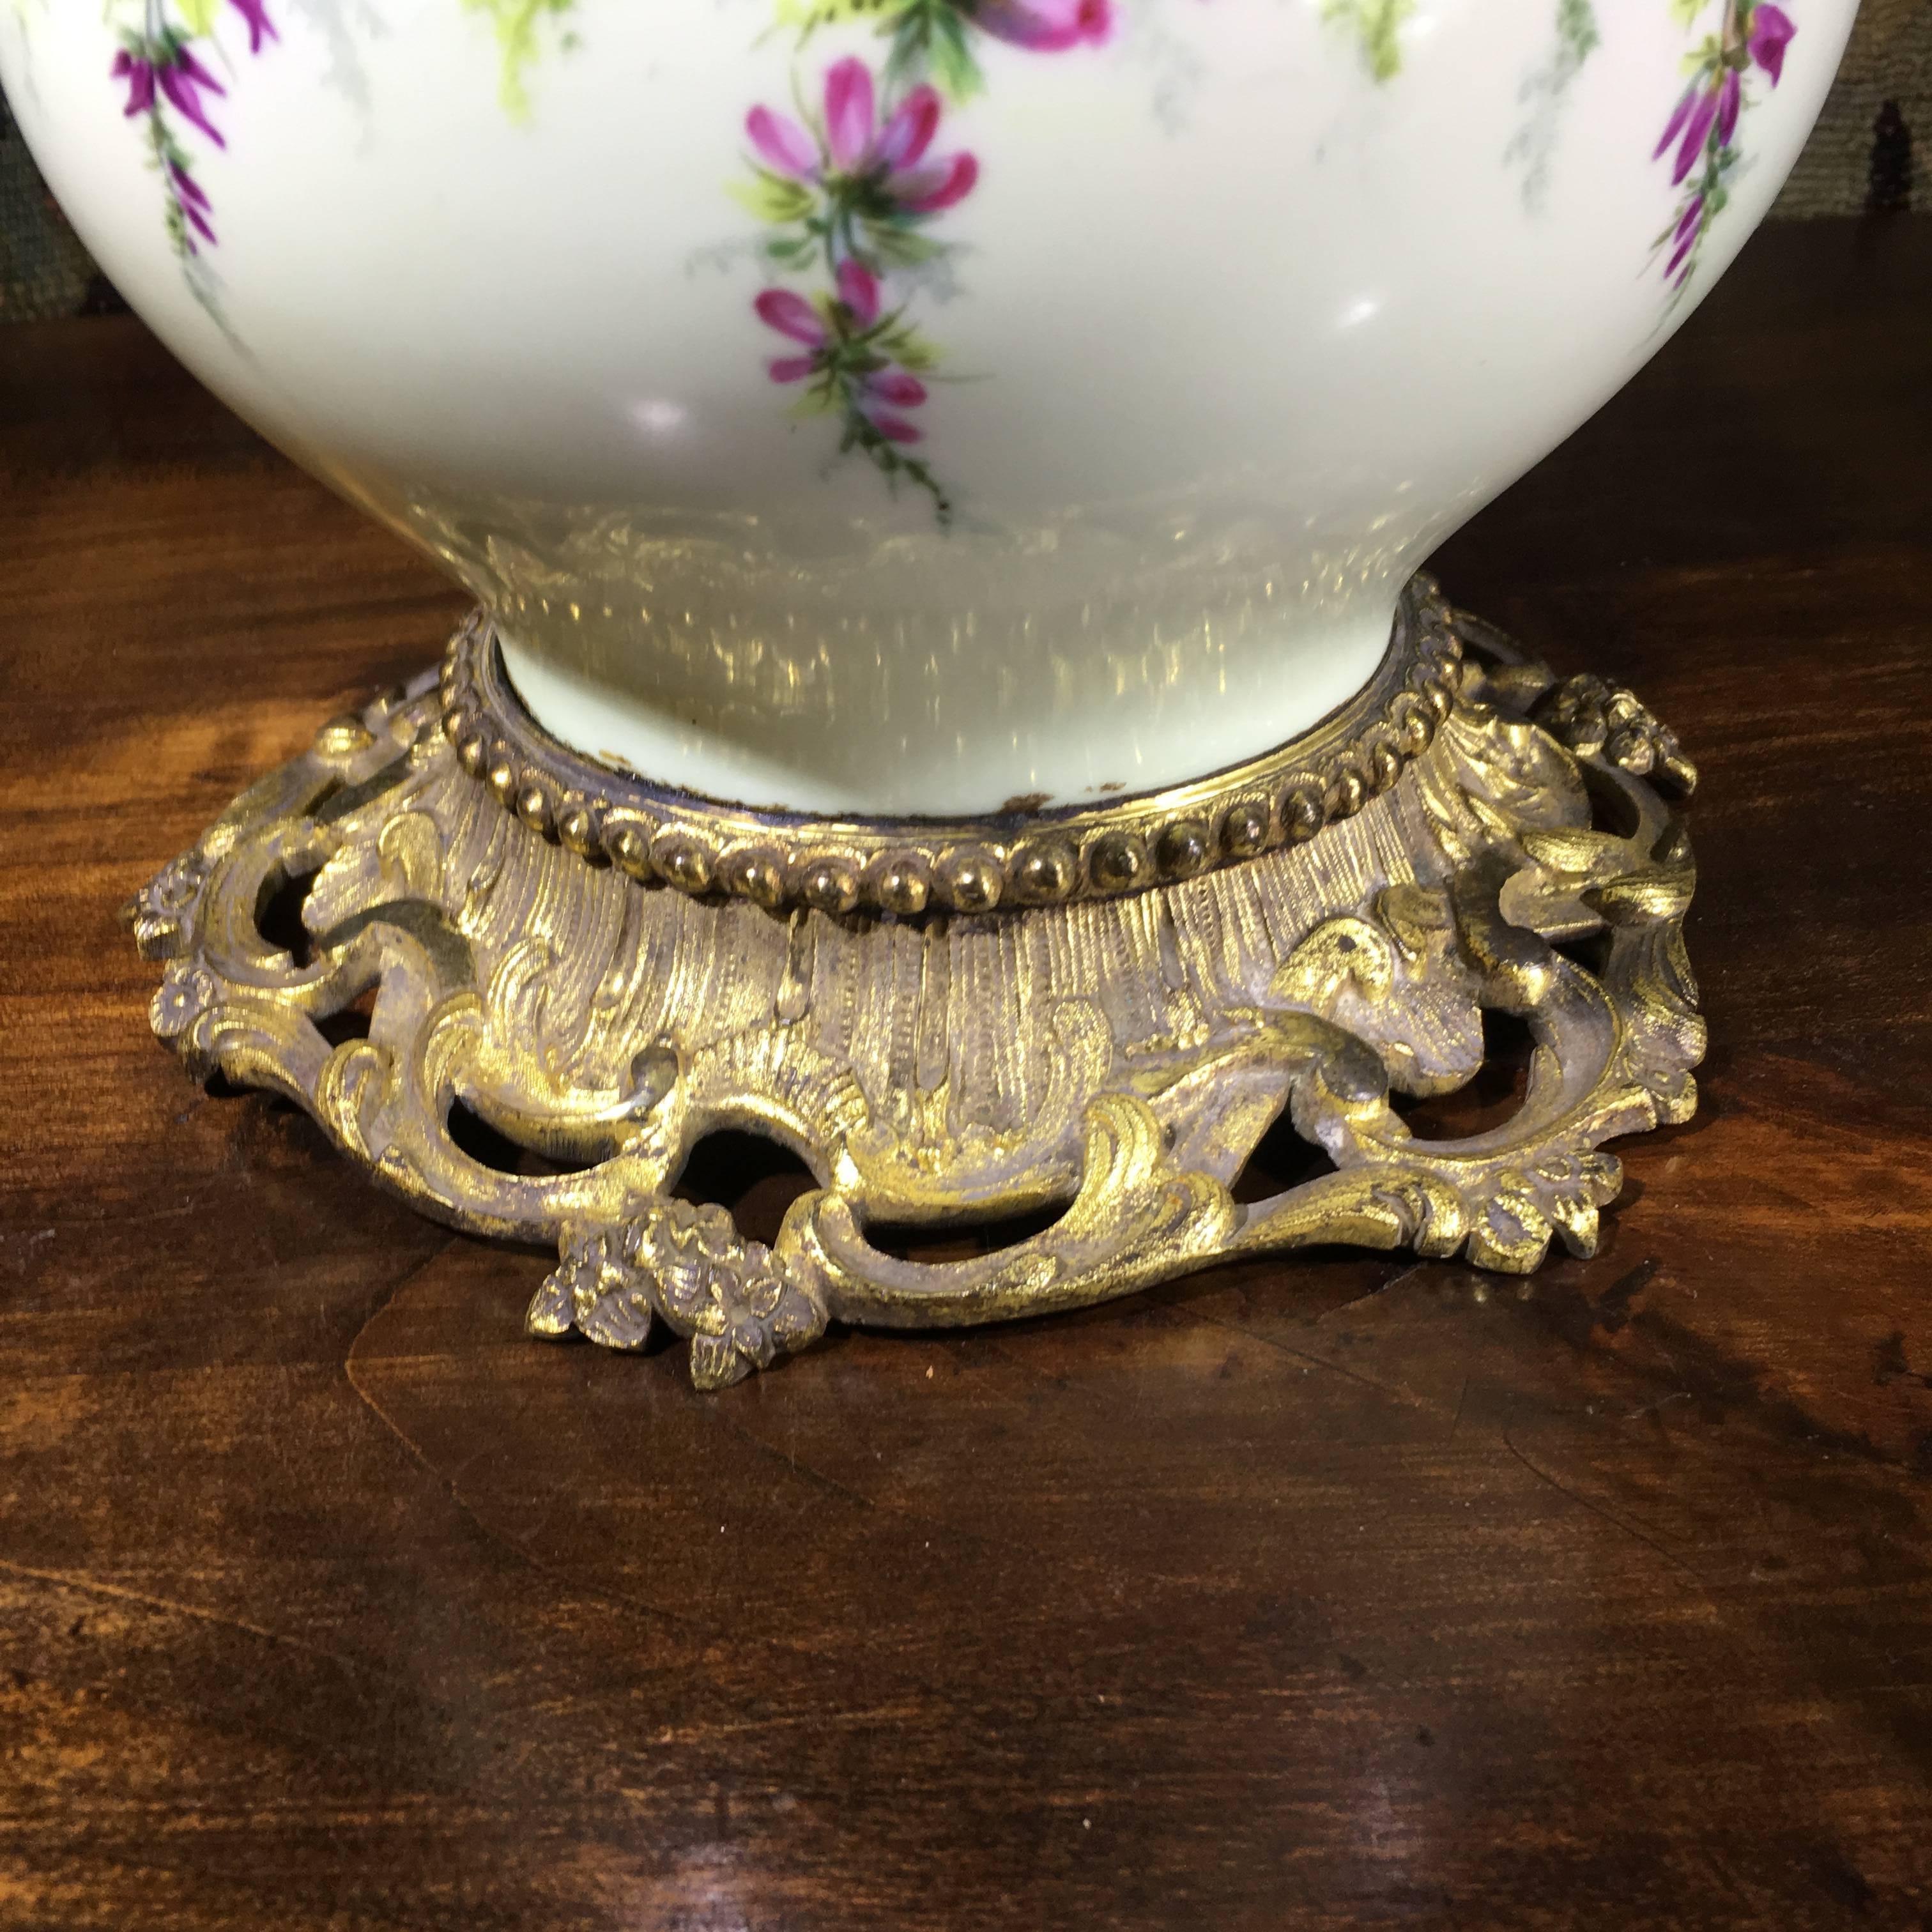 Late 19th Century Large Victorian Porcelain Vase with Early Light Conversion, circa 1885